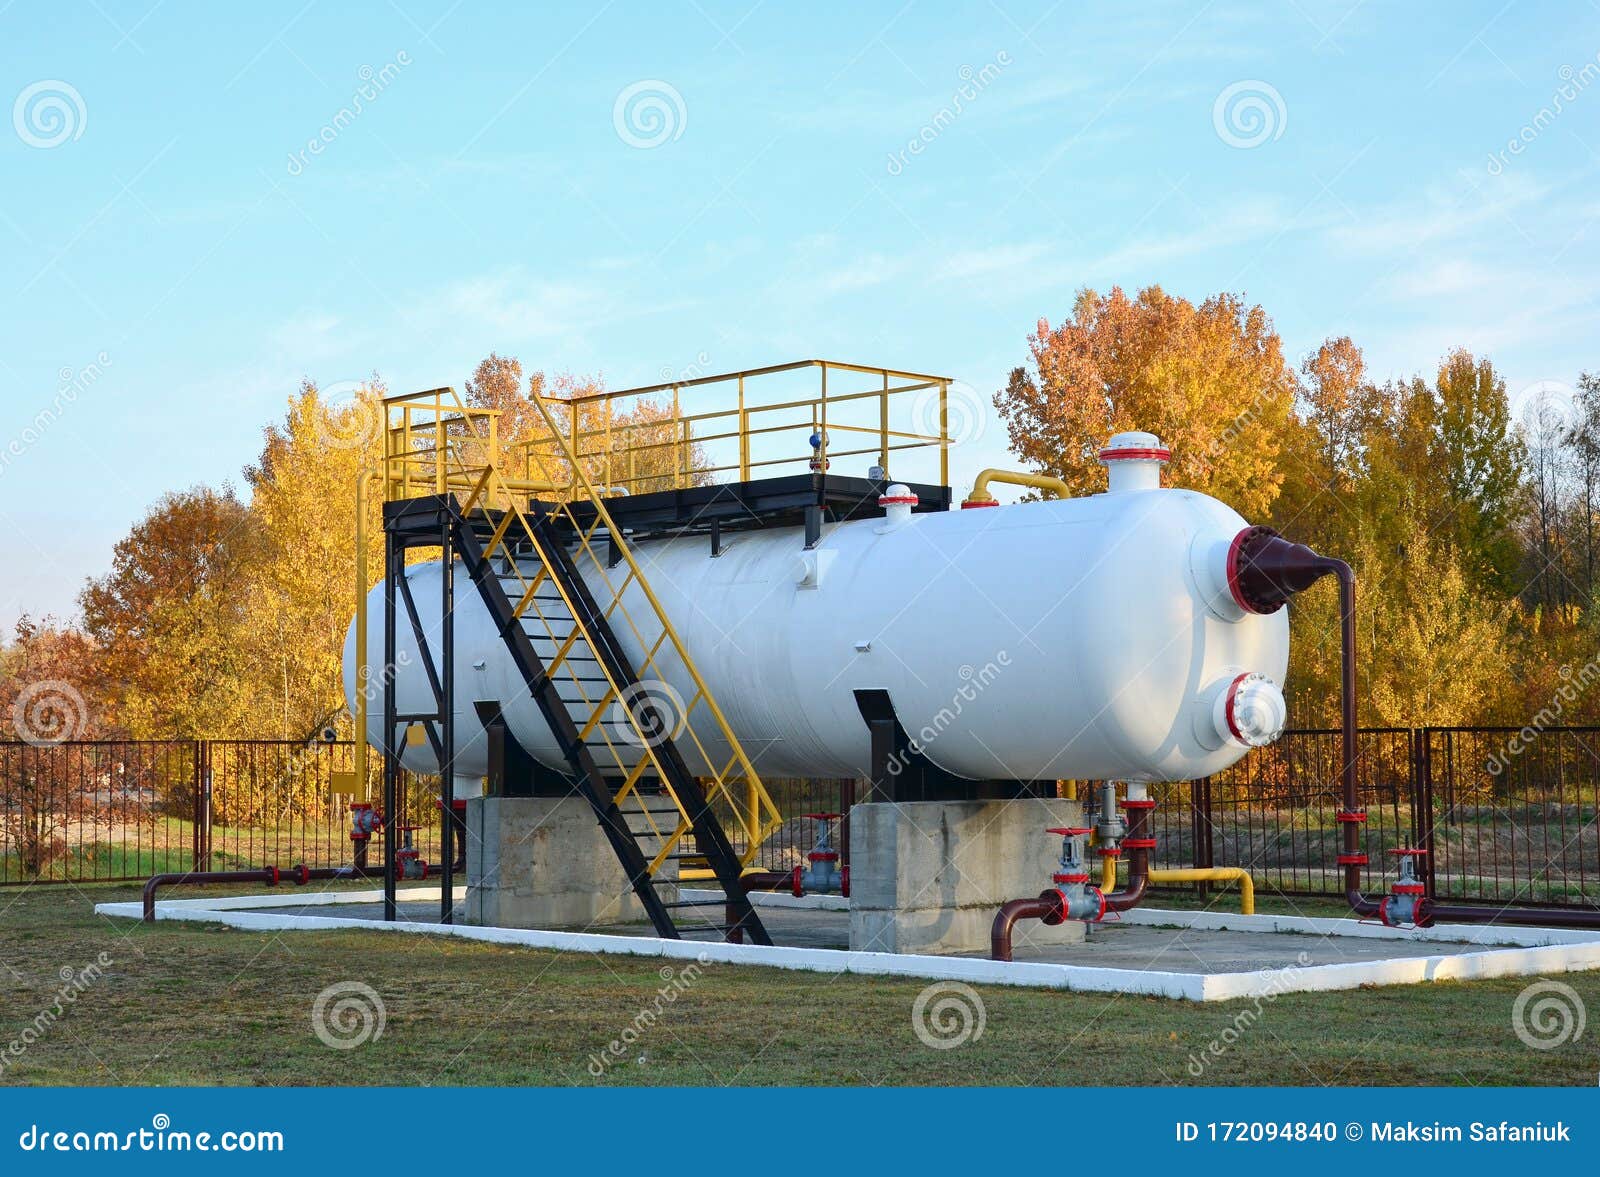 separator at oilfield production facility, separating oil and gas from the well streams. crude oil metering station and pipeline